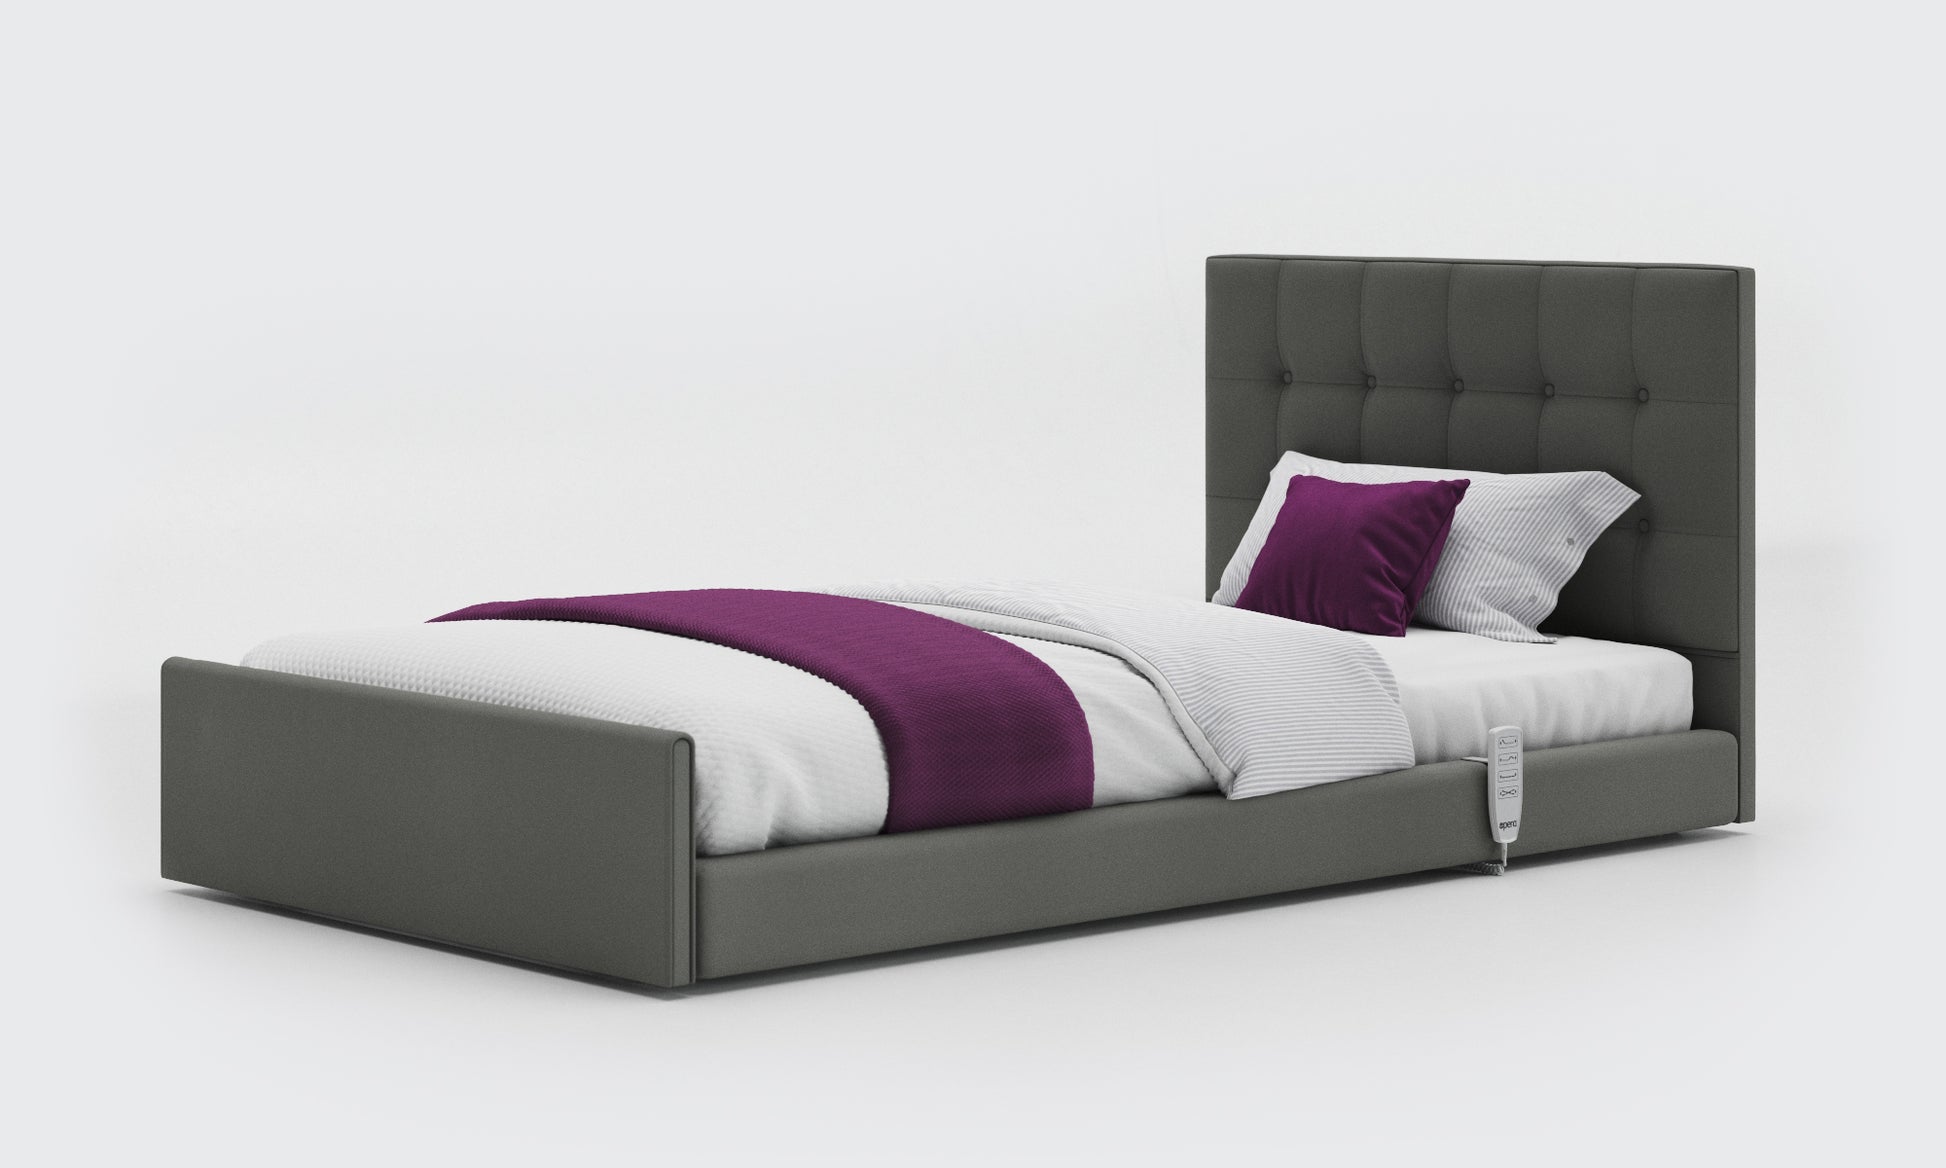 solo comfort bed 3ft6 with an emerald headboard in lichtgrau leather